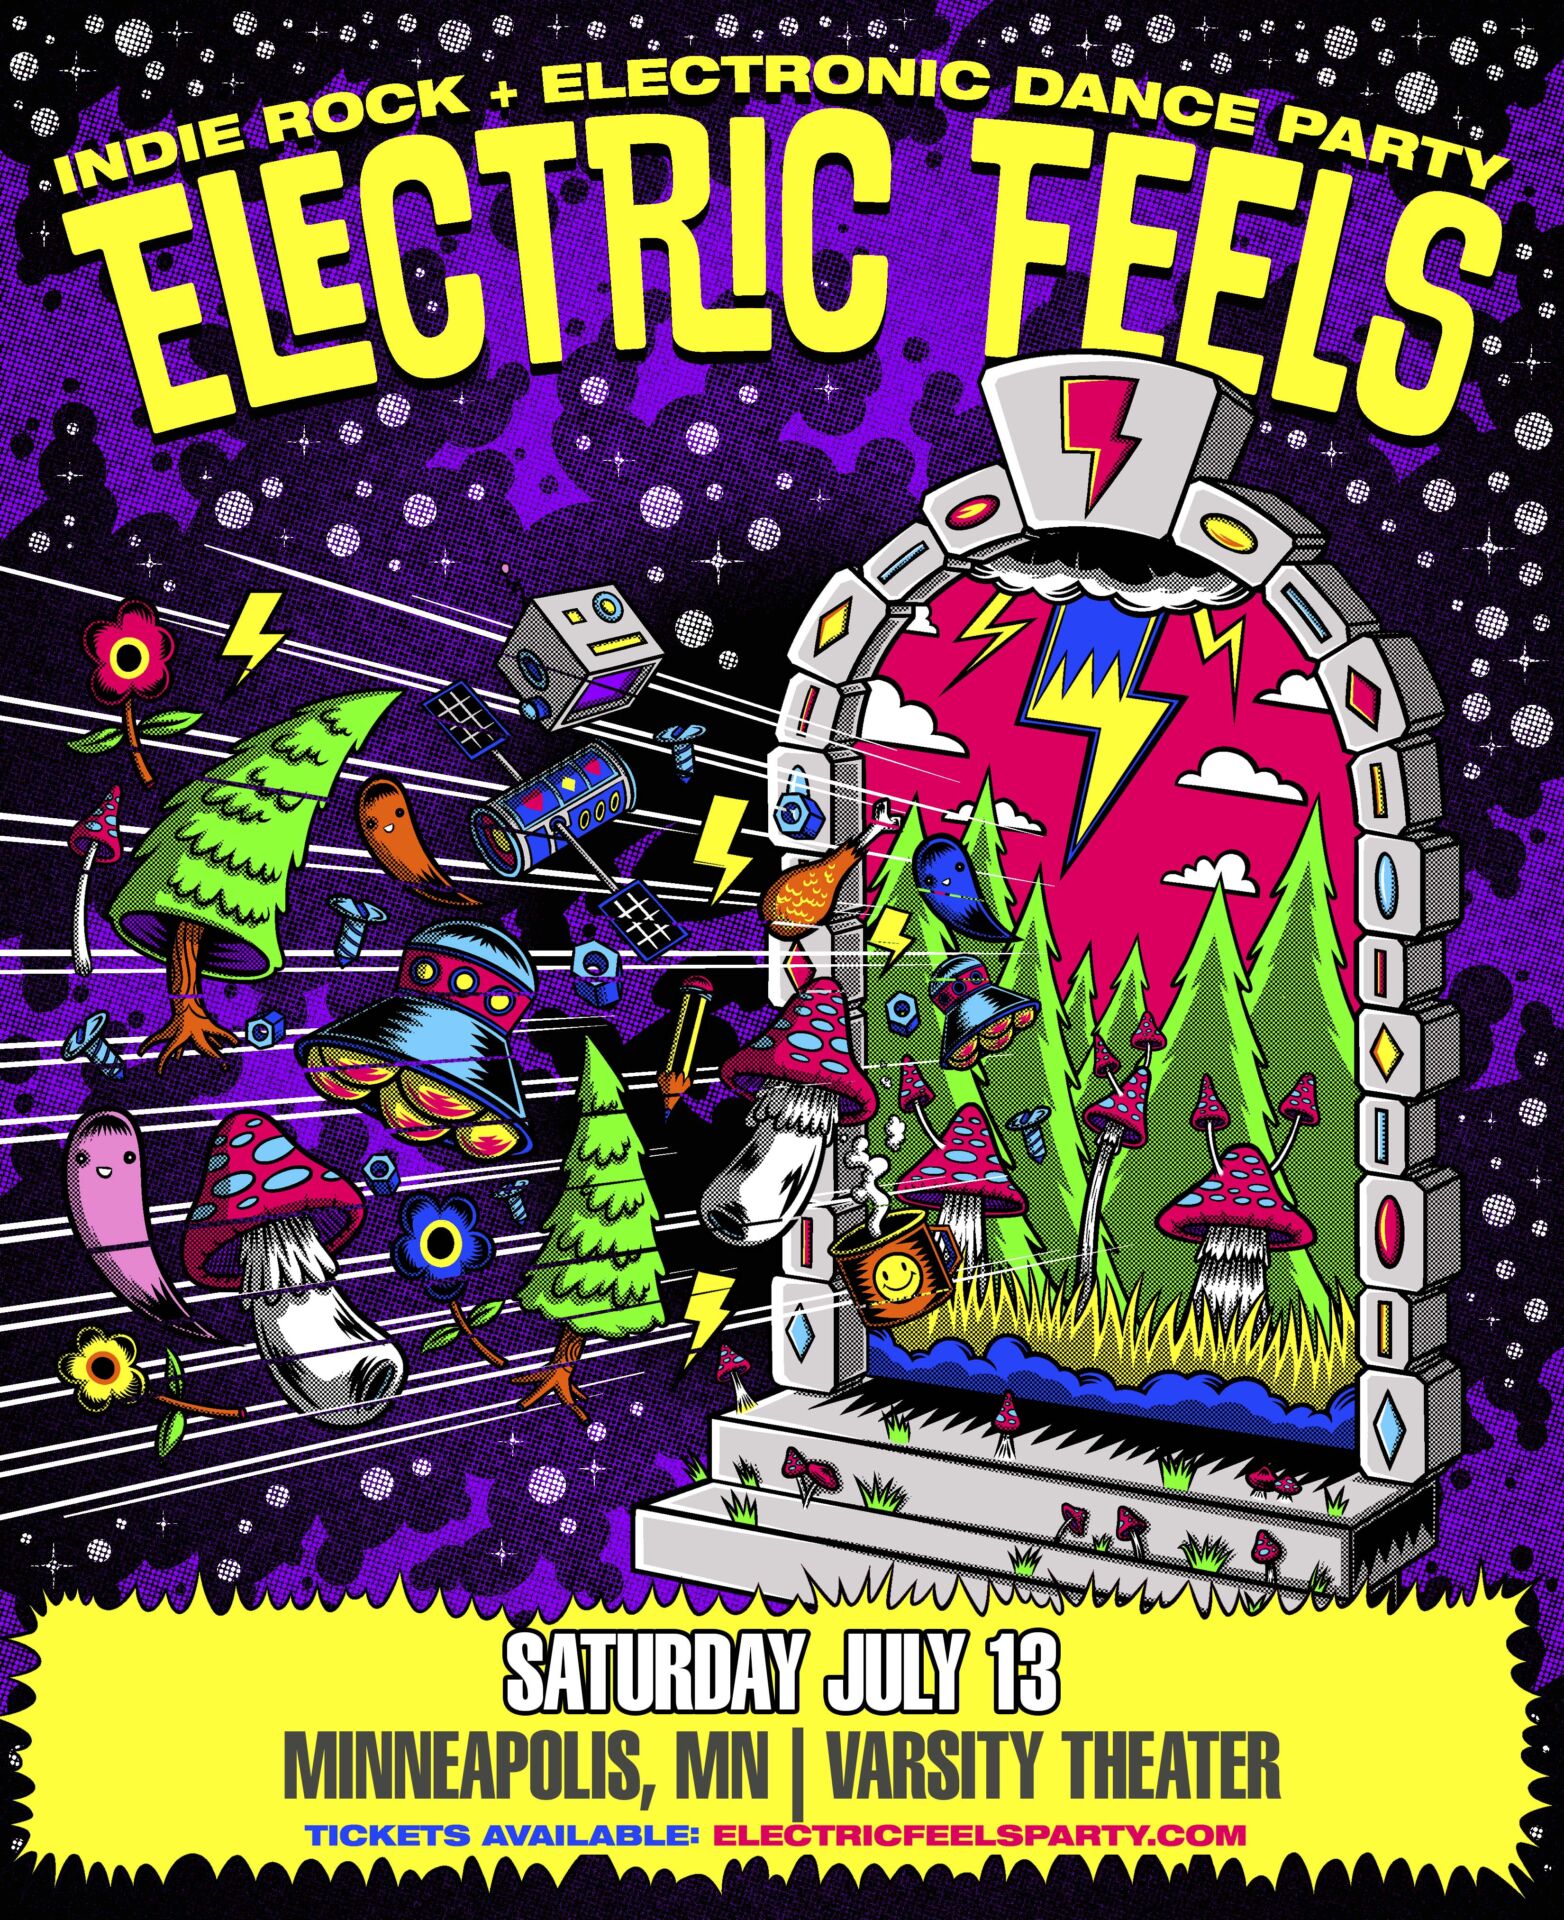 Electric Feels at Varsity Theater